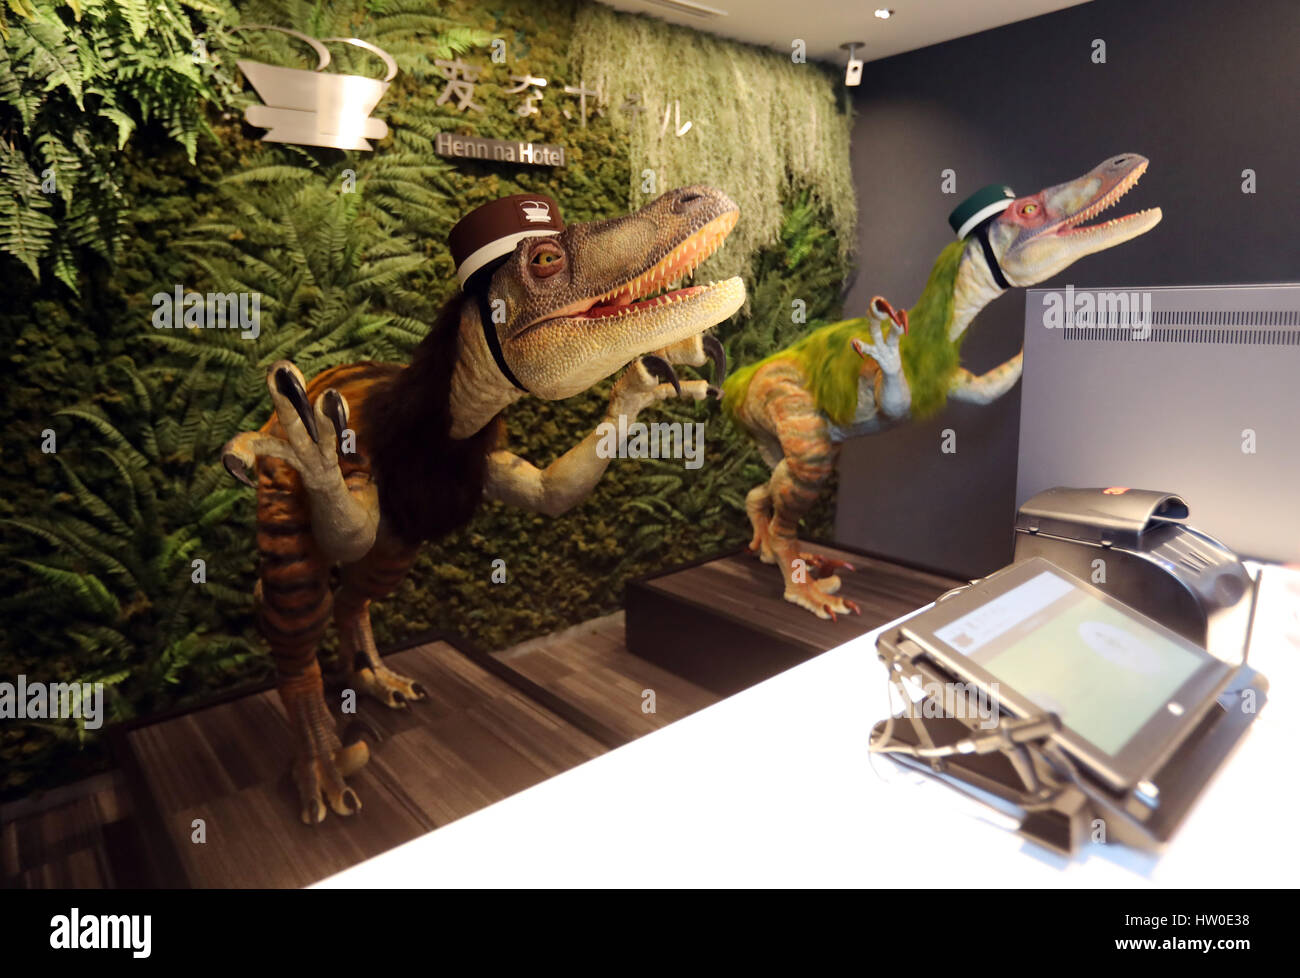 Tokyo, Japan. 15th March 2017. Urayasu, Japan. 15th Mar, 2017. Dinosaur robots greet guests at a reception of the newly opened 'Henn na Hotel' (Strange hotel) near Tokyo Disney Resort in Urayasu, suburban Tokyo on Wednesday, March 15, 2017. Japan's travel agency H.I.S runs the Henn na Hotel which has only seven human employees while nine types 140 robot staffs work at the 100-room six-storey hotel. Credit: Aflo Co. Ltd./Alamy Live News Stock Photo